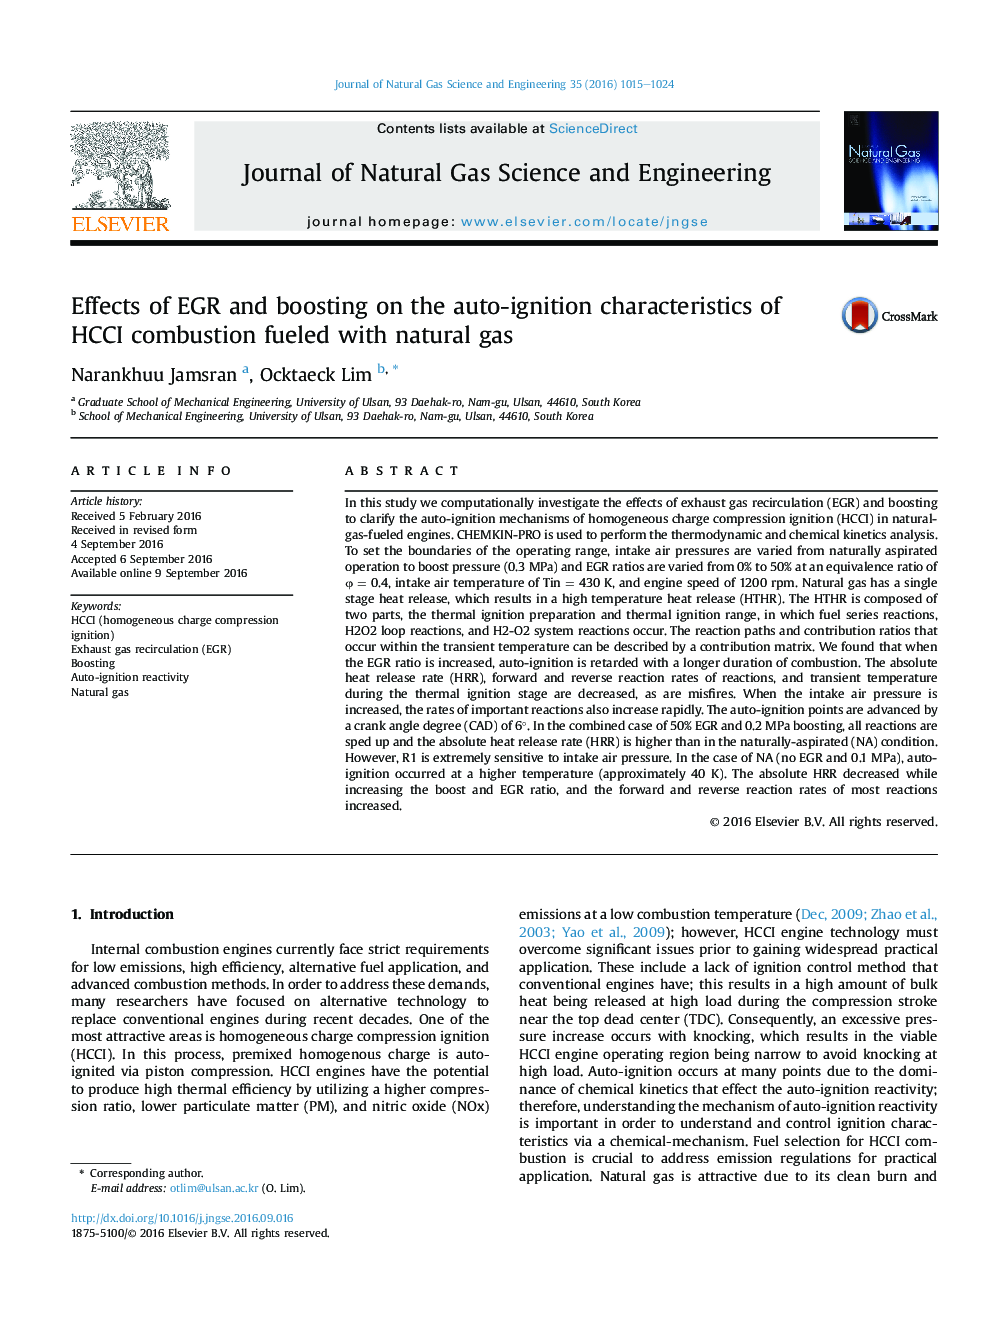 Effects of EGR and boosting on the auto-ignition characteristics of HCCI combustion fueled with natural gas